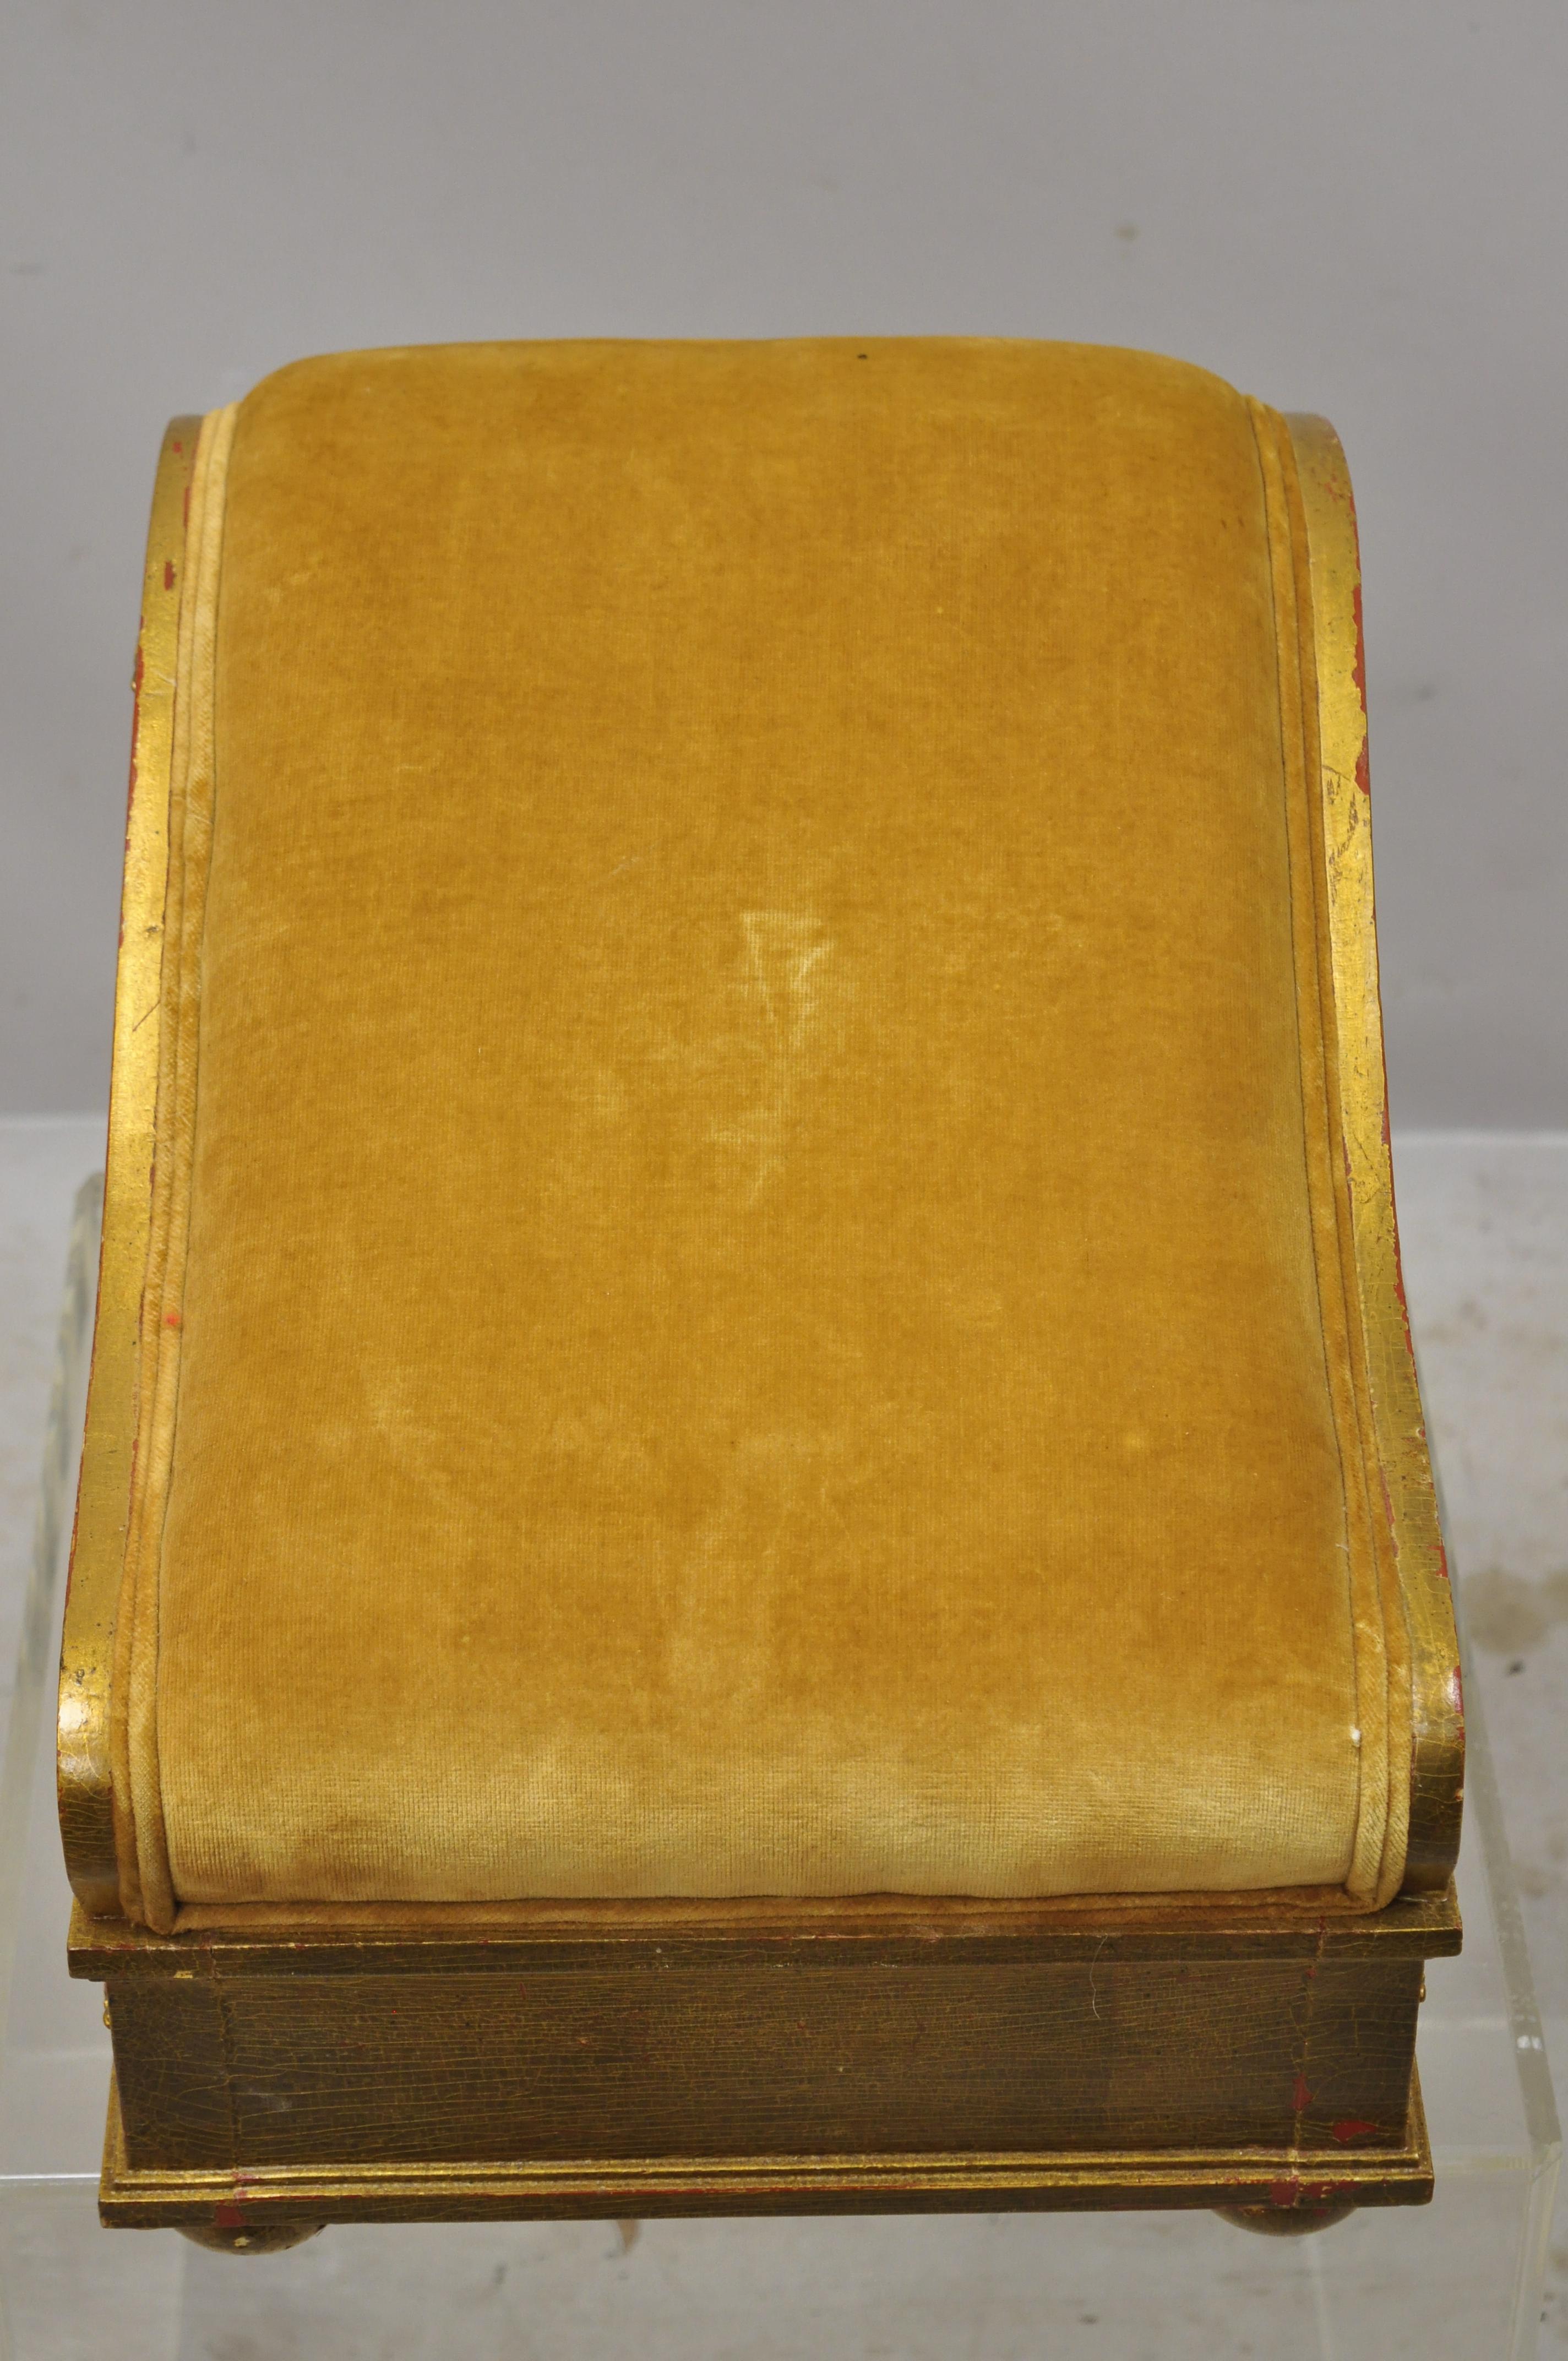 Vintage Italian Empire Style Gold Giltwood Swedish Gout Stool Footstool Ottoman For Sale 1